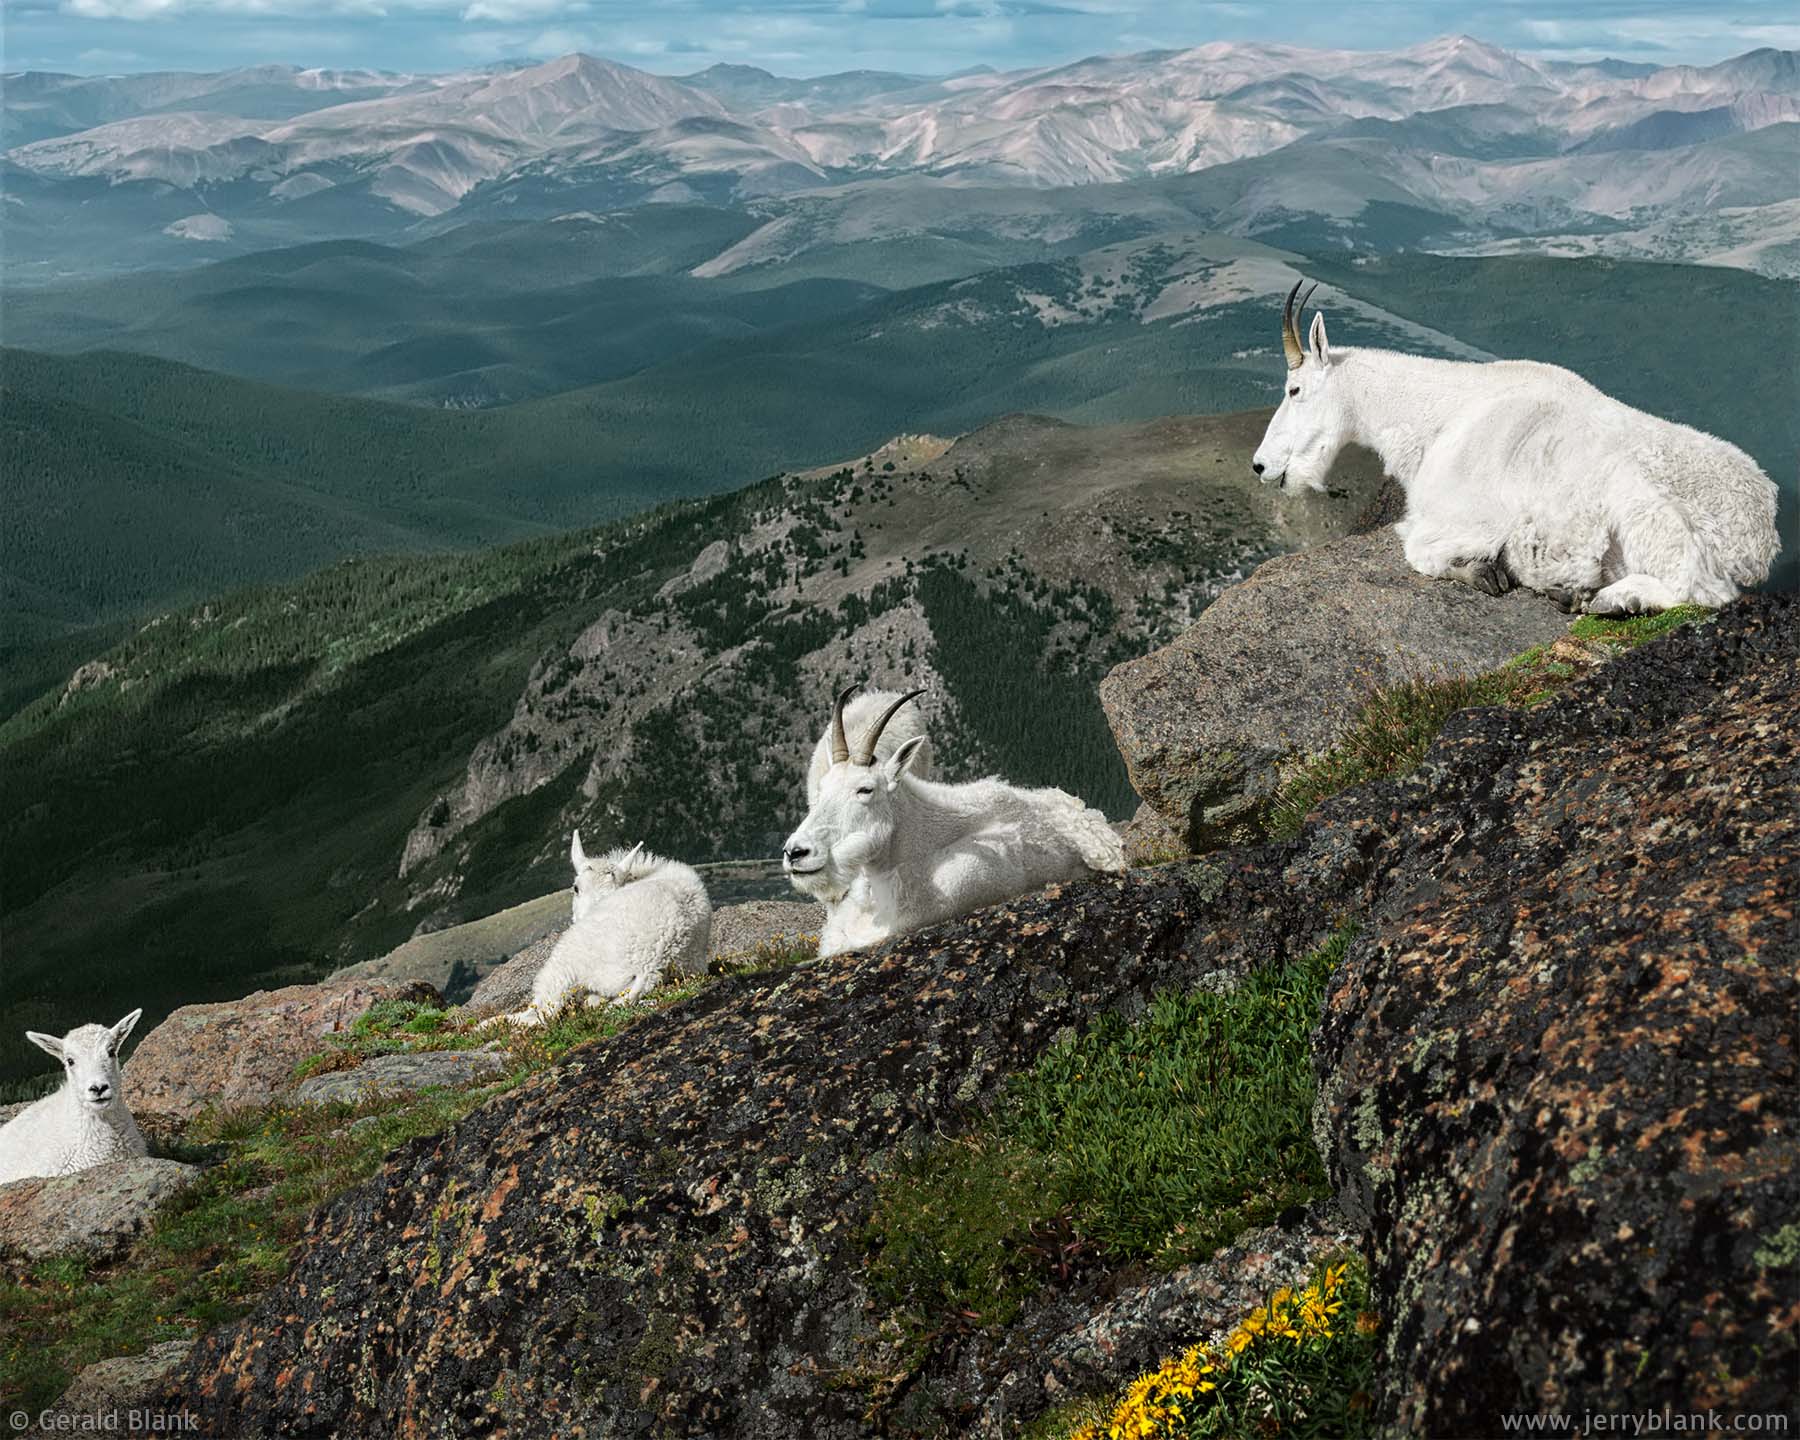 #20510 - Mountain goats with kids on the southern face of Mount Evans, Colorado - wildlife photo by Jerry Blank